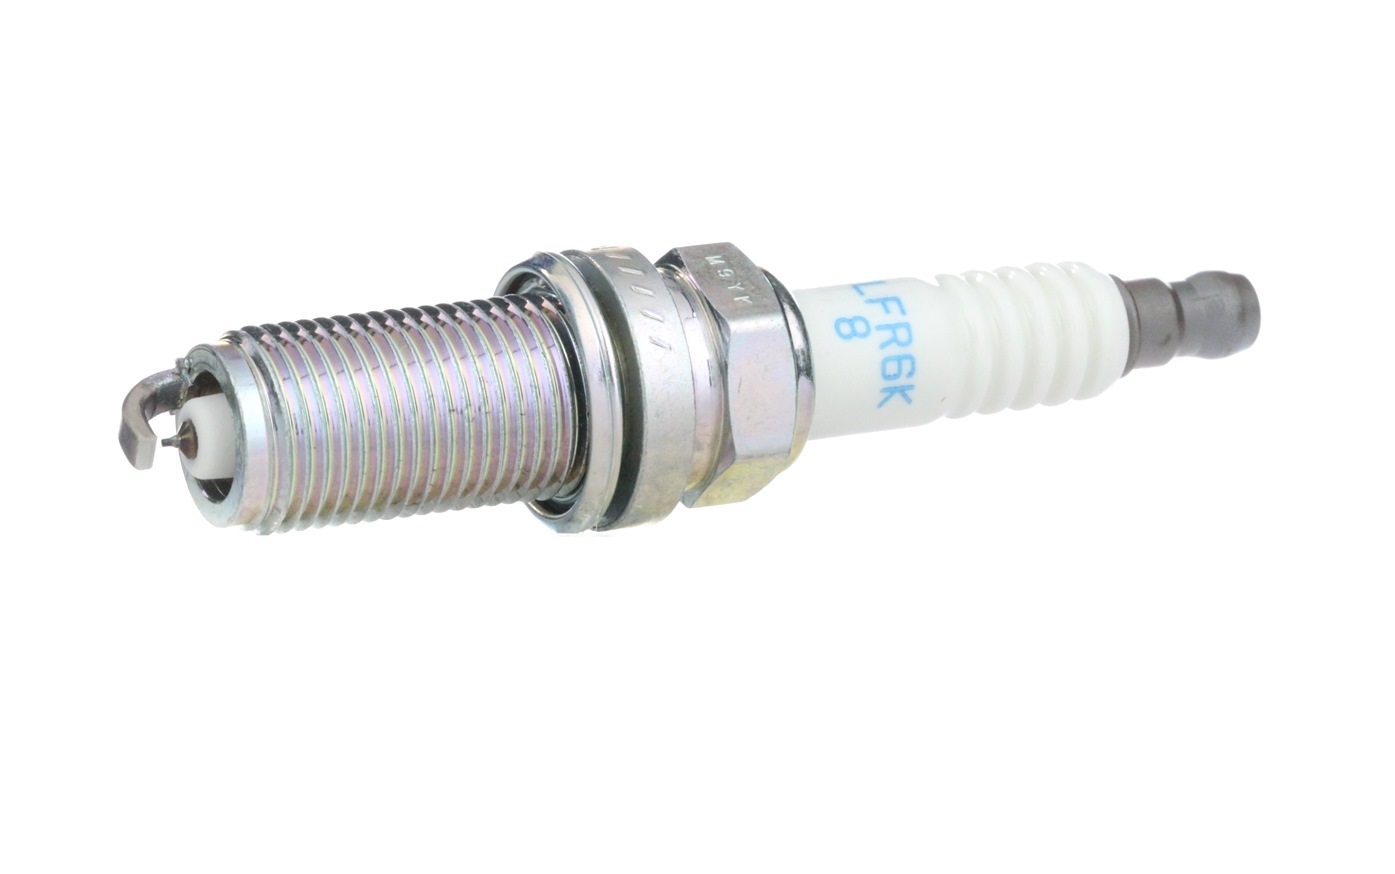 NGK 94040 Spark plug cheap in online store